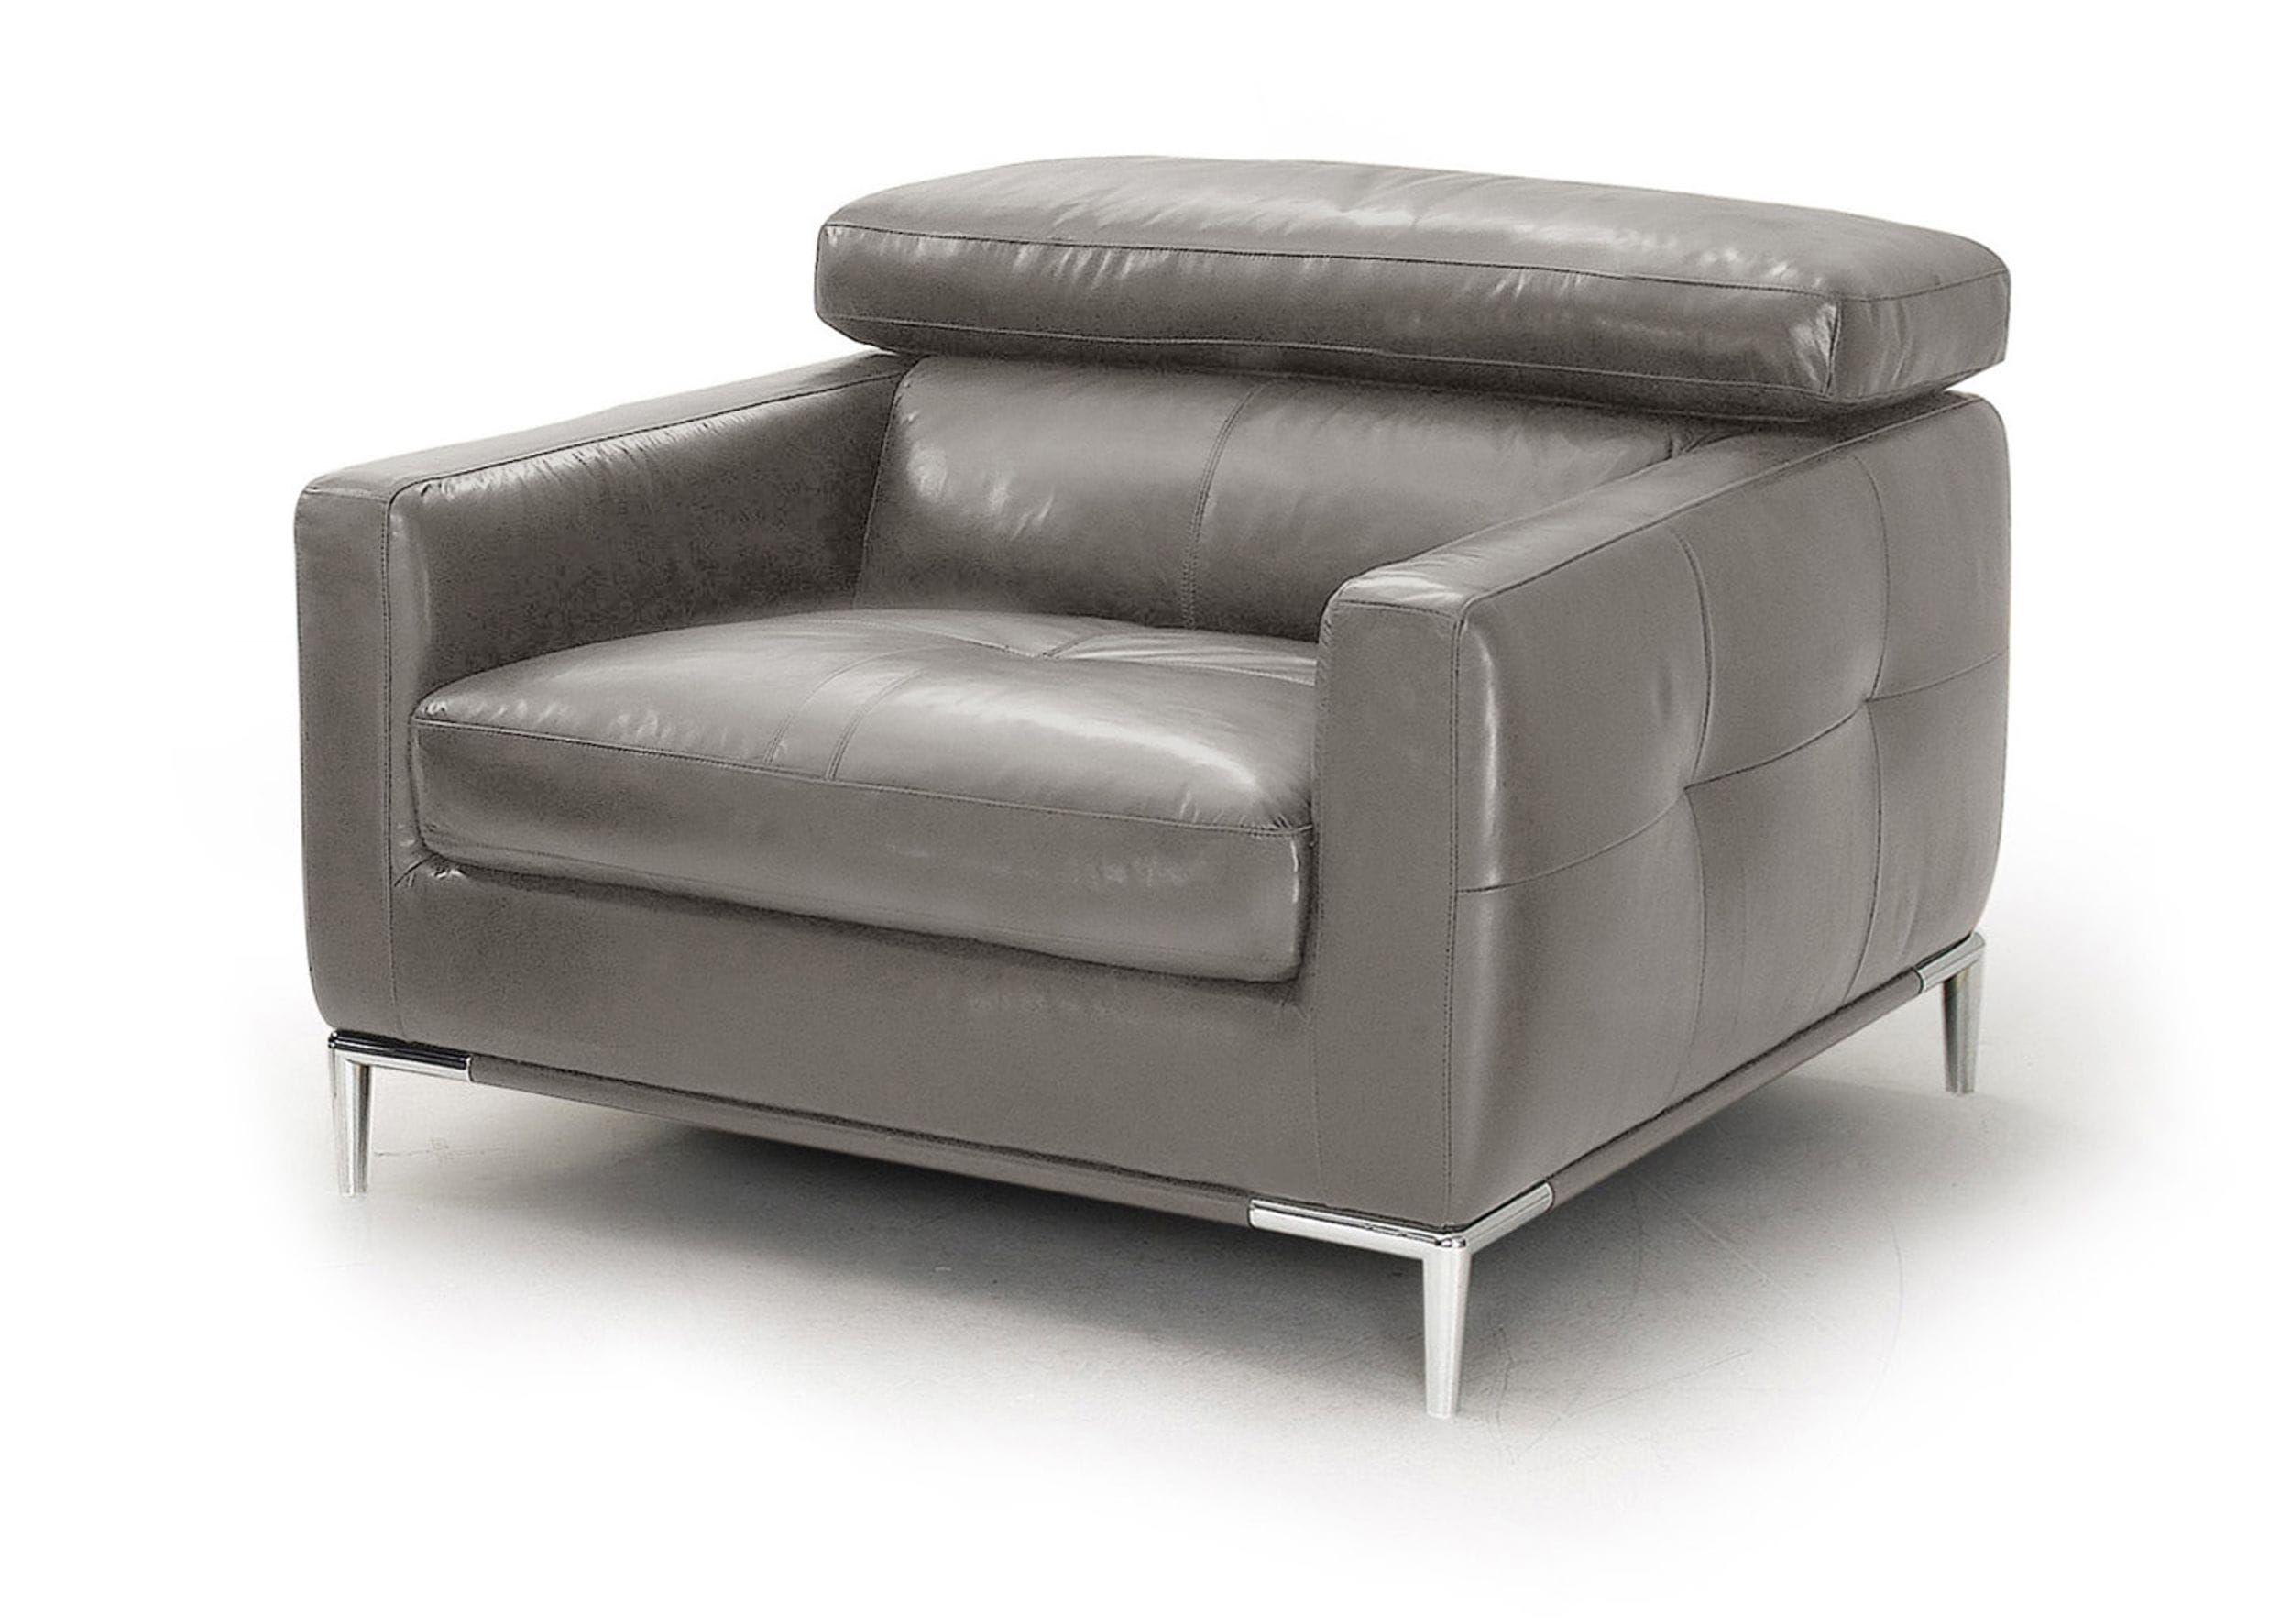 Contemporary, Modern Arm Chair VGKK1281X-DKGRY-CH VGKK1281X-DKGRY-CH in Dark Grey Leather